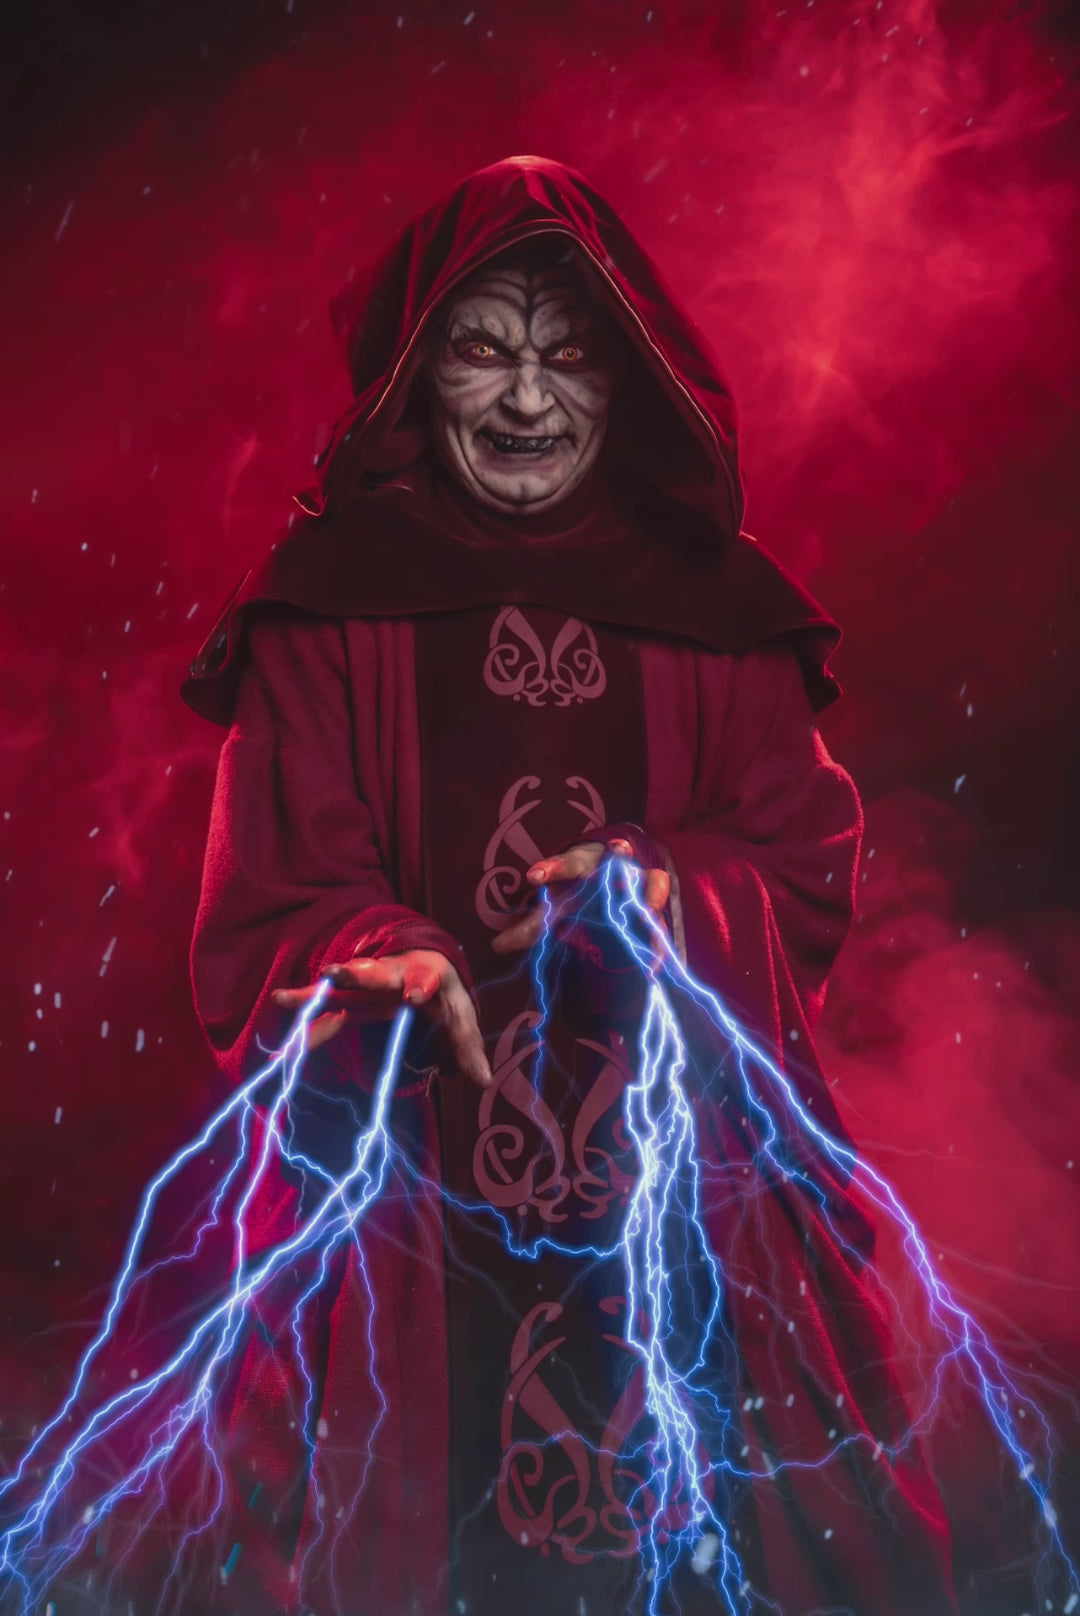 Star Wars Emperor Palpatine Costume Hire or Cosplay, plus Makeup and Photography. Proudly by and available at, Little Shop of Horrors Costumery Mornington & Melbourne